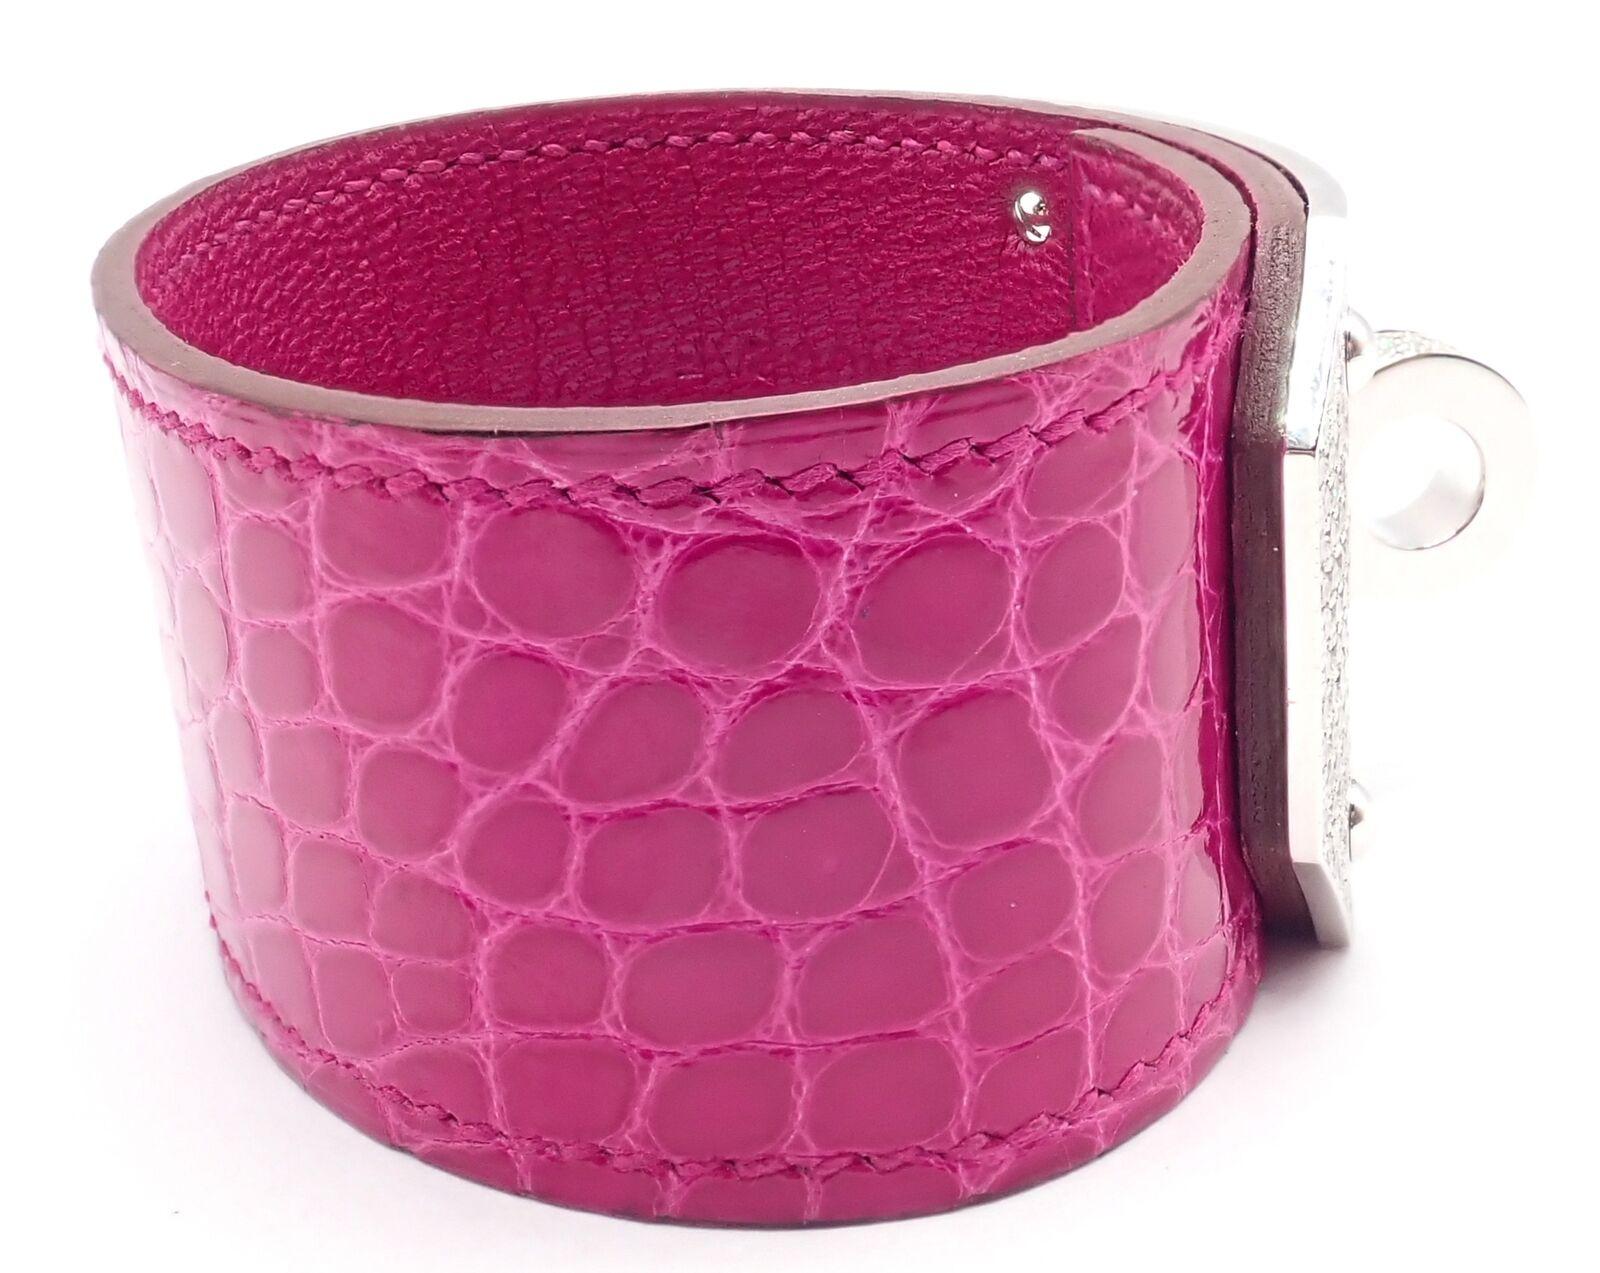 18k White Gold Diamond Kelly  Fuchsia Crocodile Wide Cuff  Bangle Bracelet by Hermes. 
With 493 Round brilliant cut diamonds VVS1 clarity, E color total weight approximately 6.75ct
This bracelet comes with original Hermes box.
Details: 
Length: